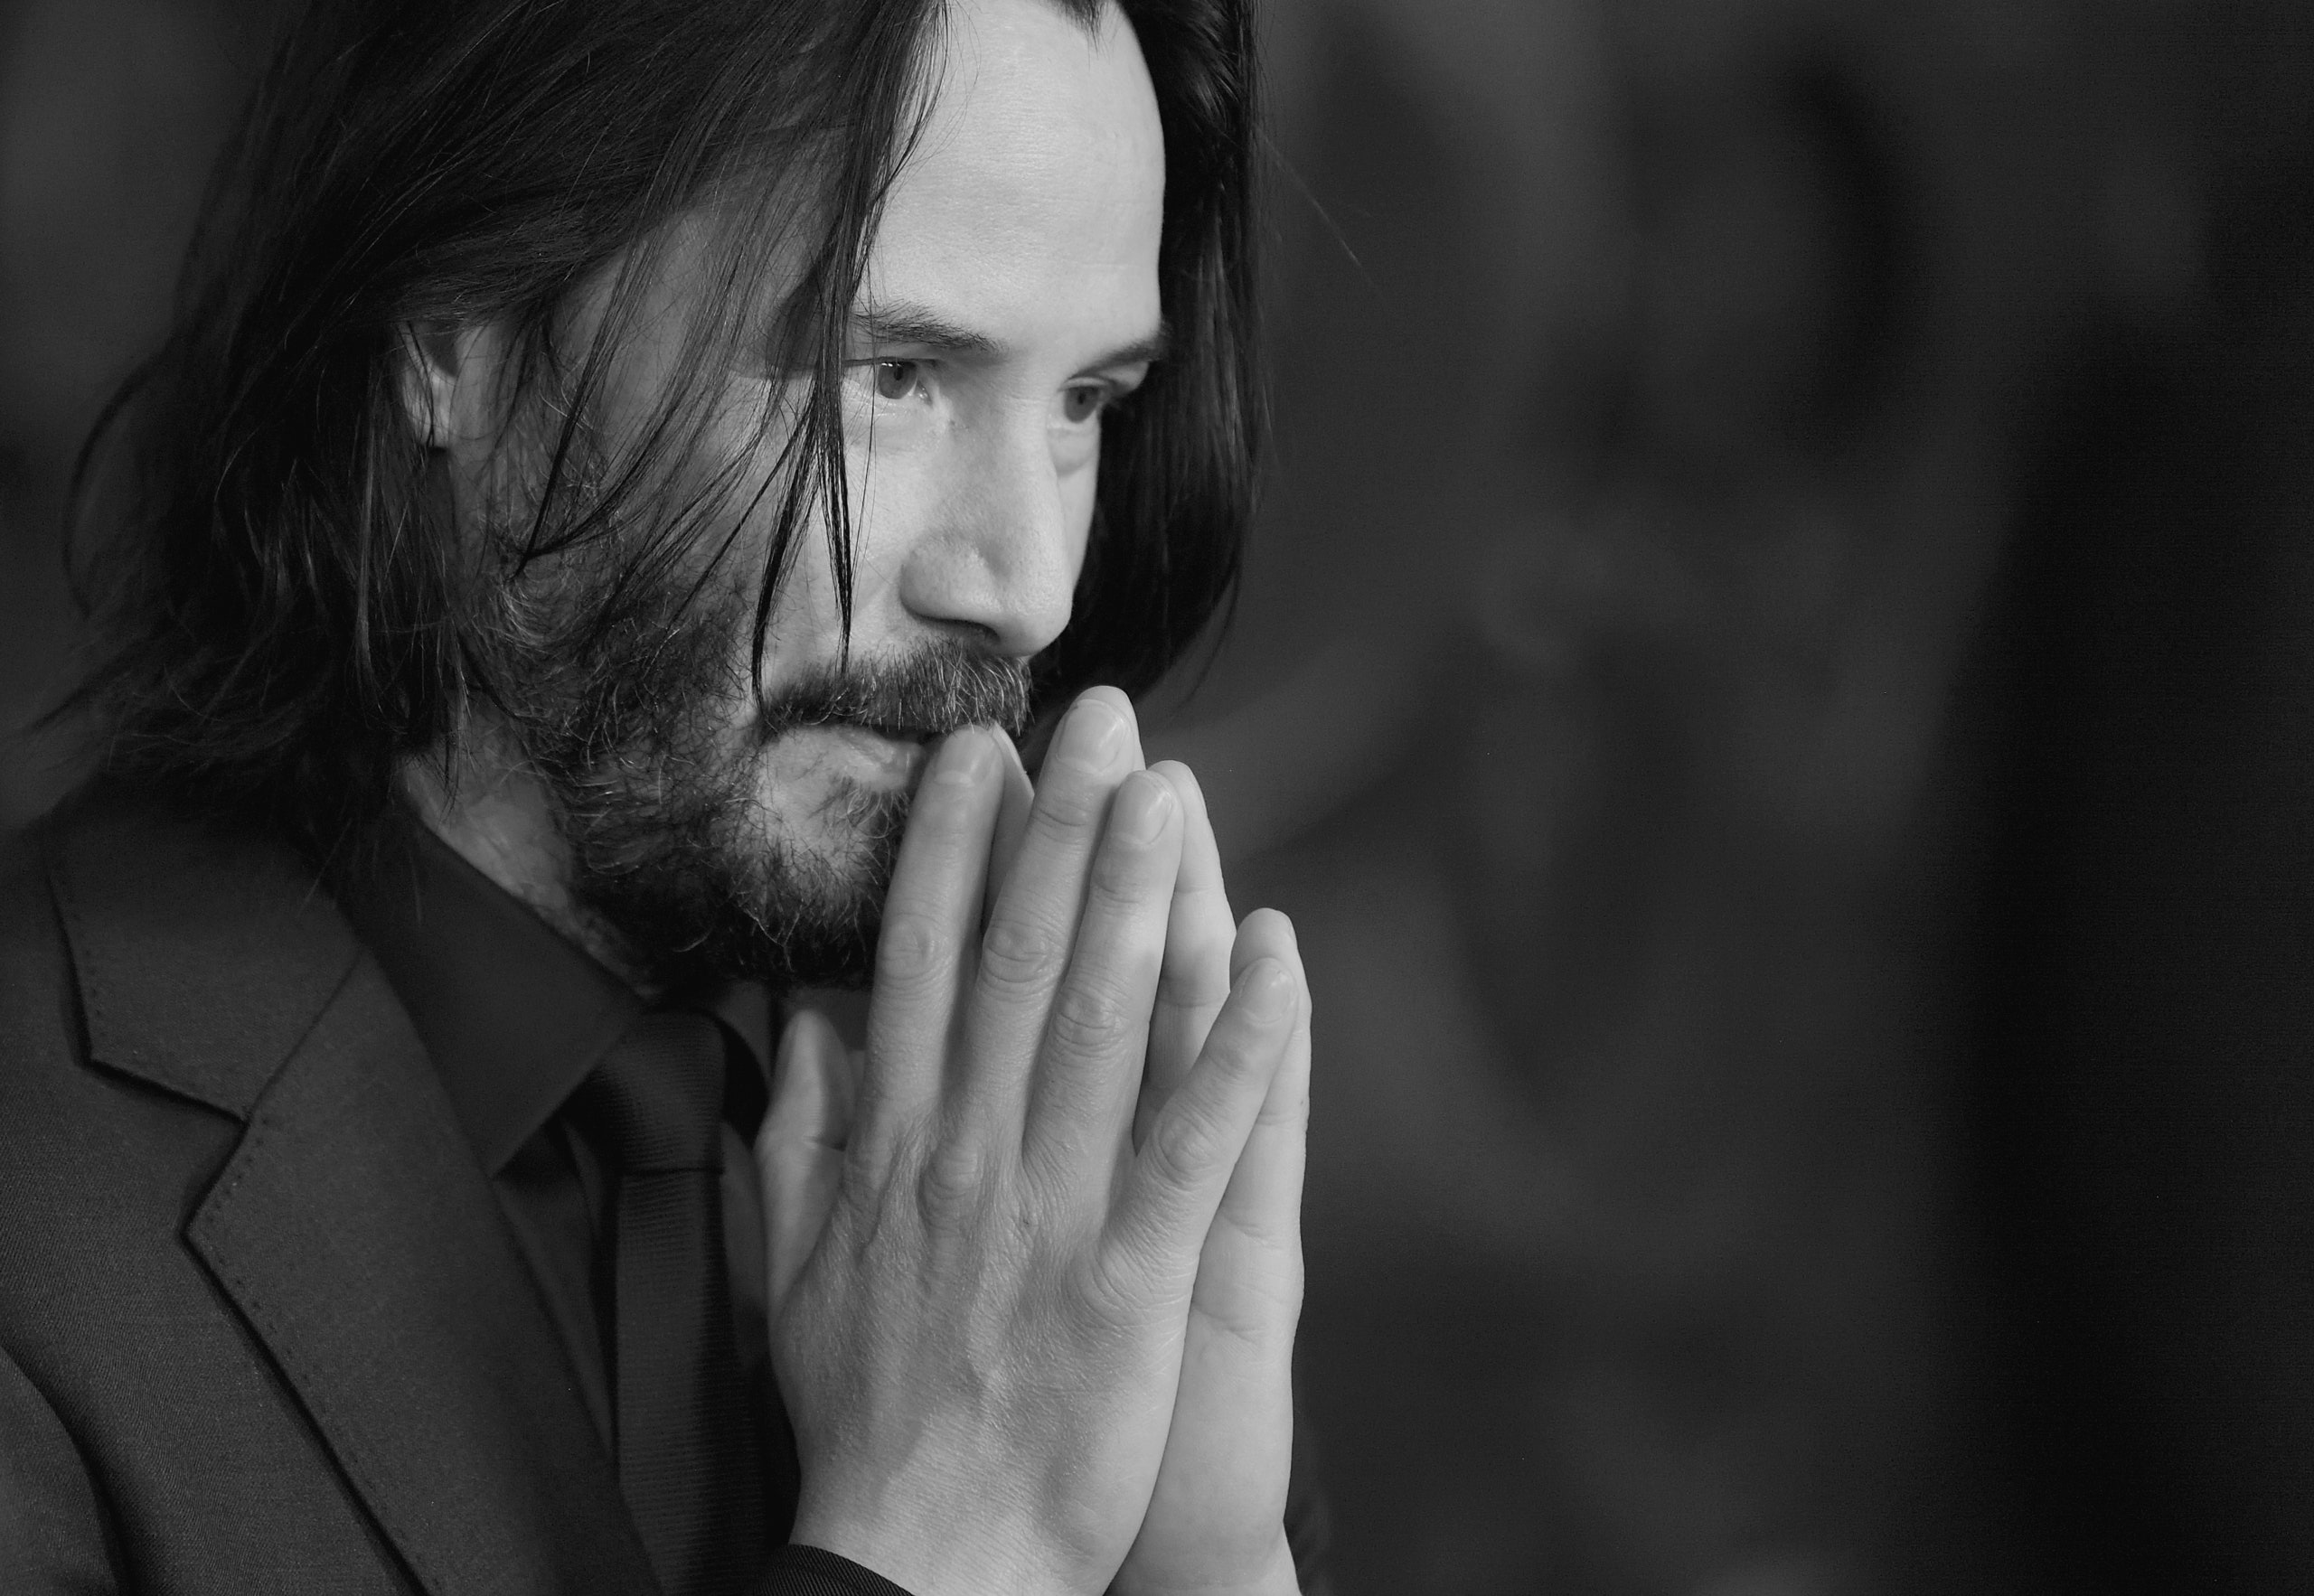 Keanu Reeves is the most charitable actor